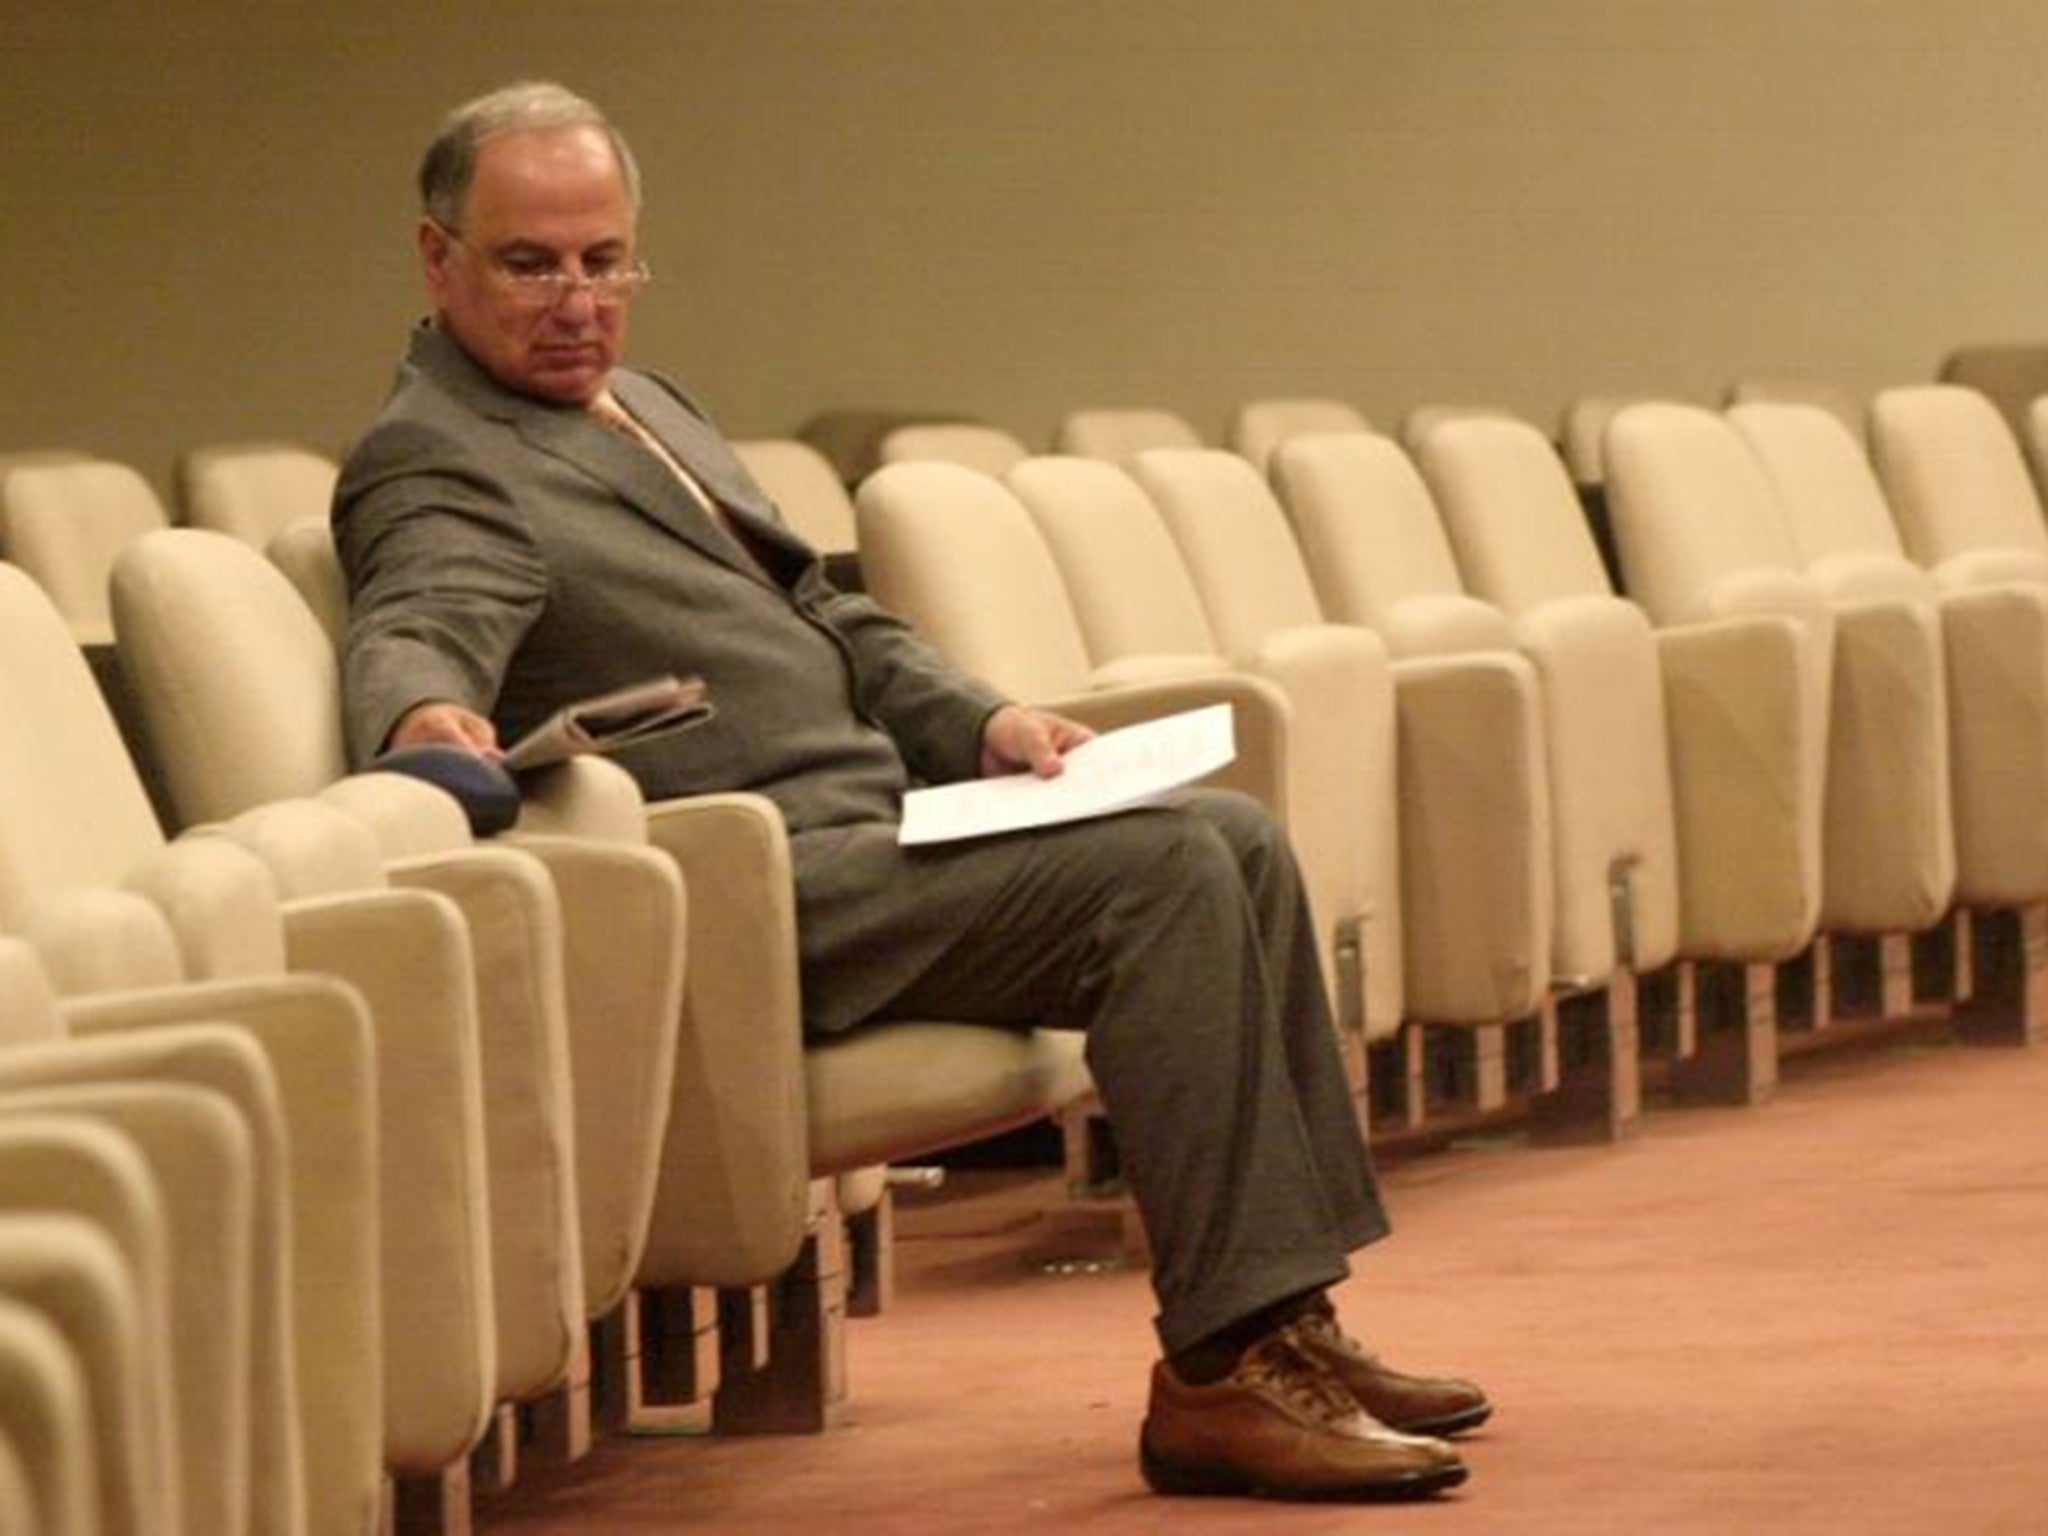 Ahmed Chalabi, whilst head of the Iraqi National Congress in 2004